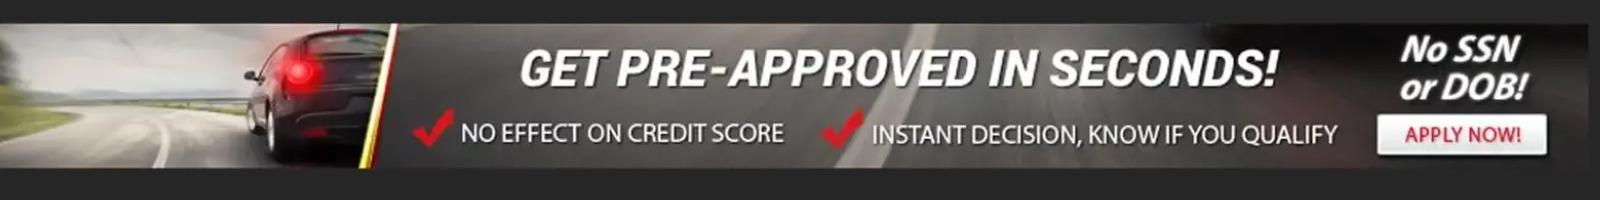 Get Pre-Approved in Seconds! No Effect on Credit Score. Instant Decision, Know If You Qualify! No SSN or DOB, Apply Now!